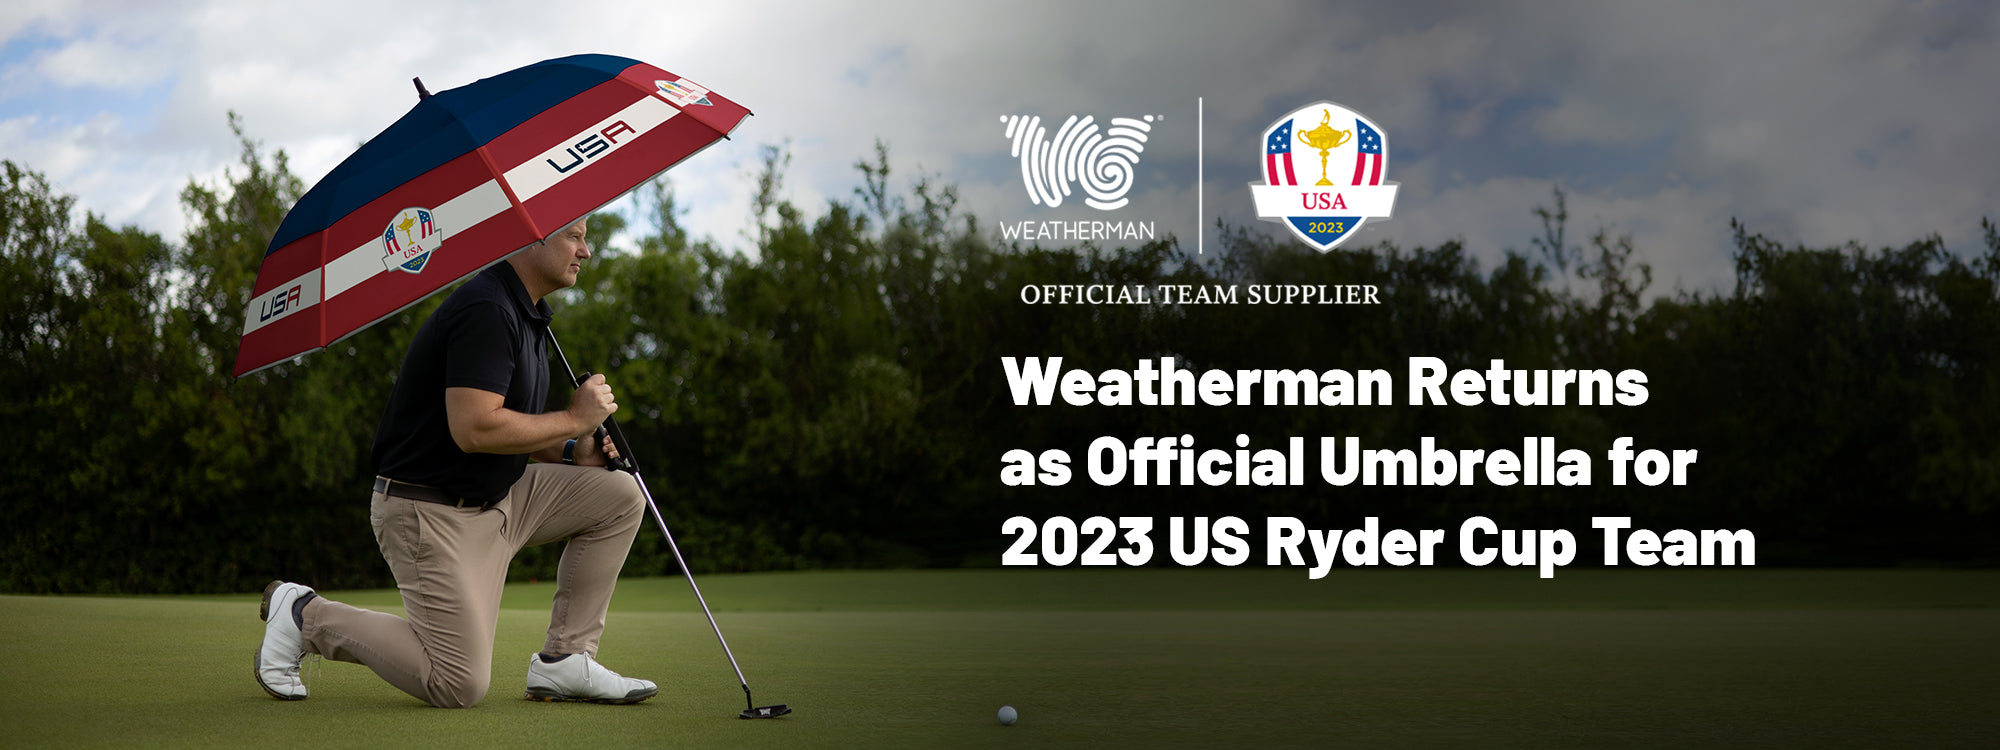 Weatherman Returns as Official Umbrella for 2023 US Ryder Cup Team